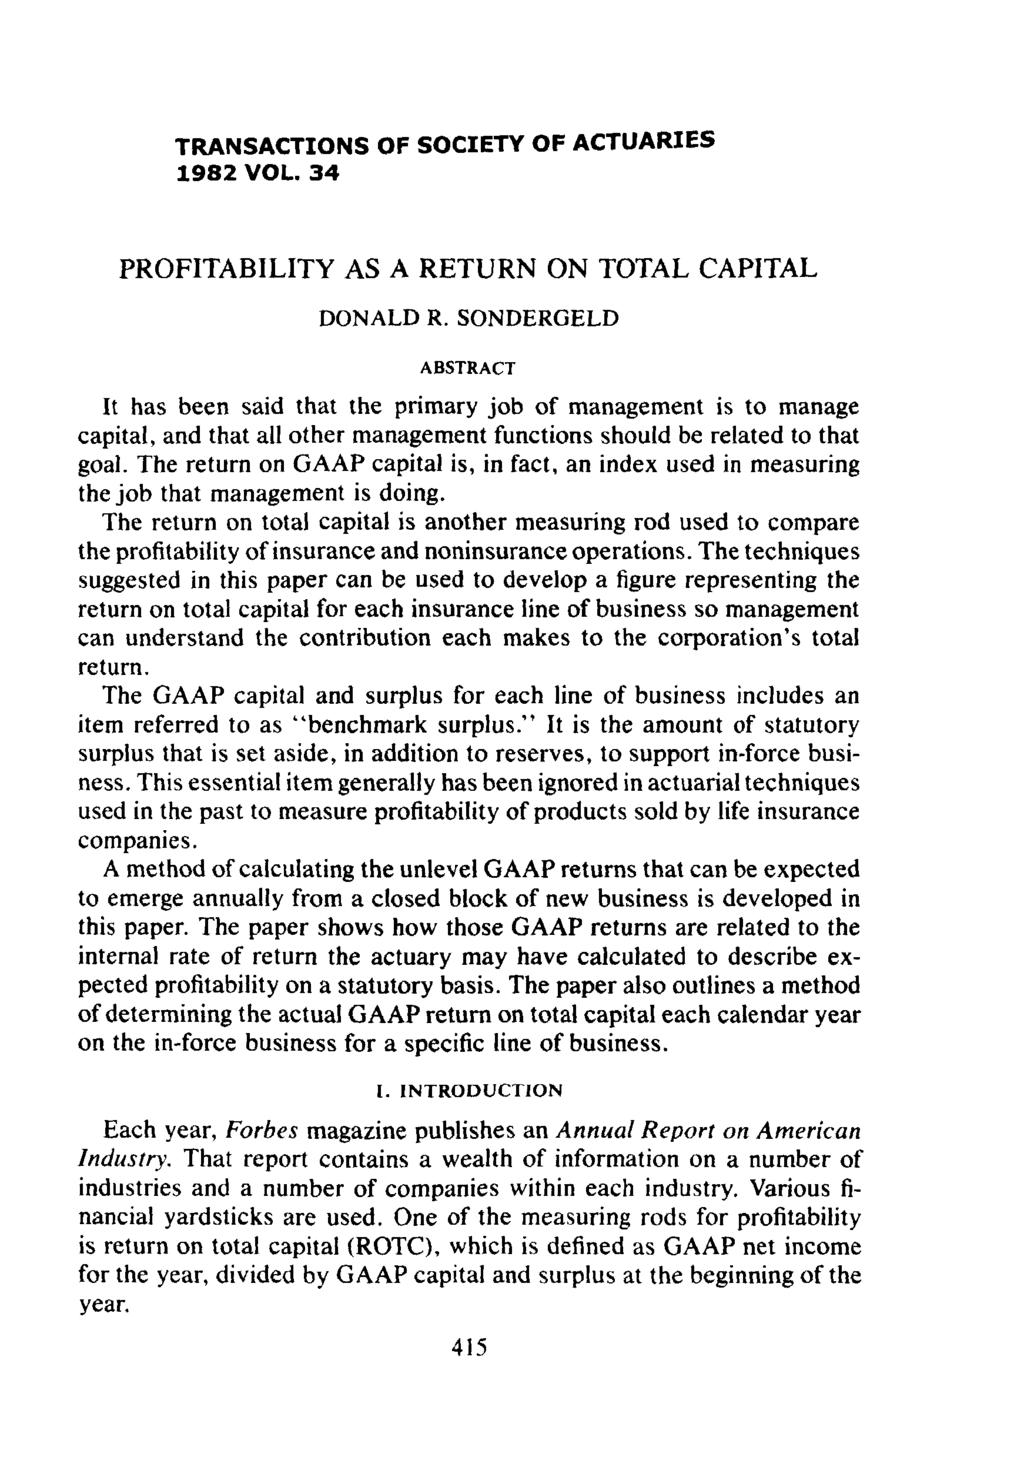 TRANSACTIONS OF SOCIETY OF ACTUARIES 1982 VOL. 34 PROFITABILITY AS A RETURN ON TOTAL CAPITAL DONALD R.